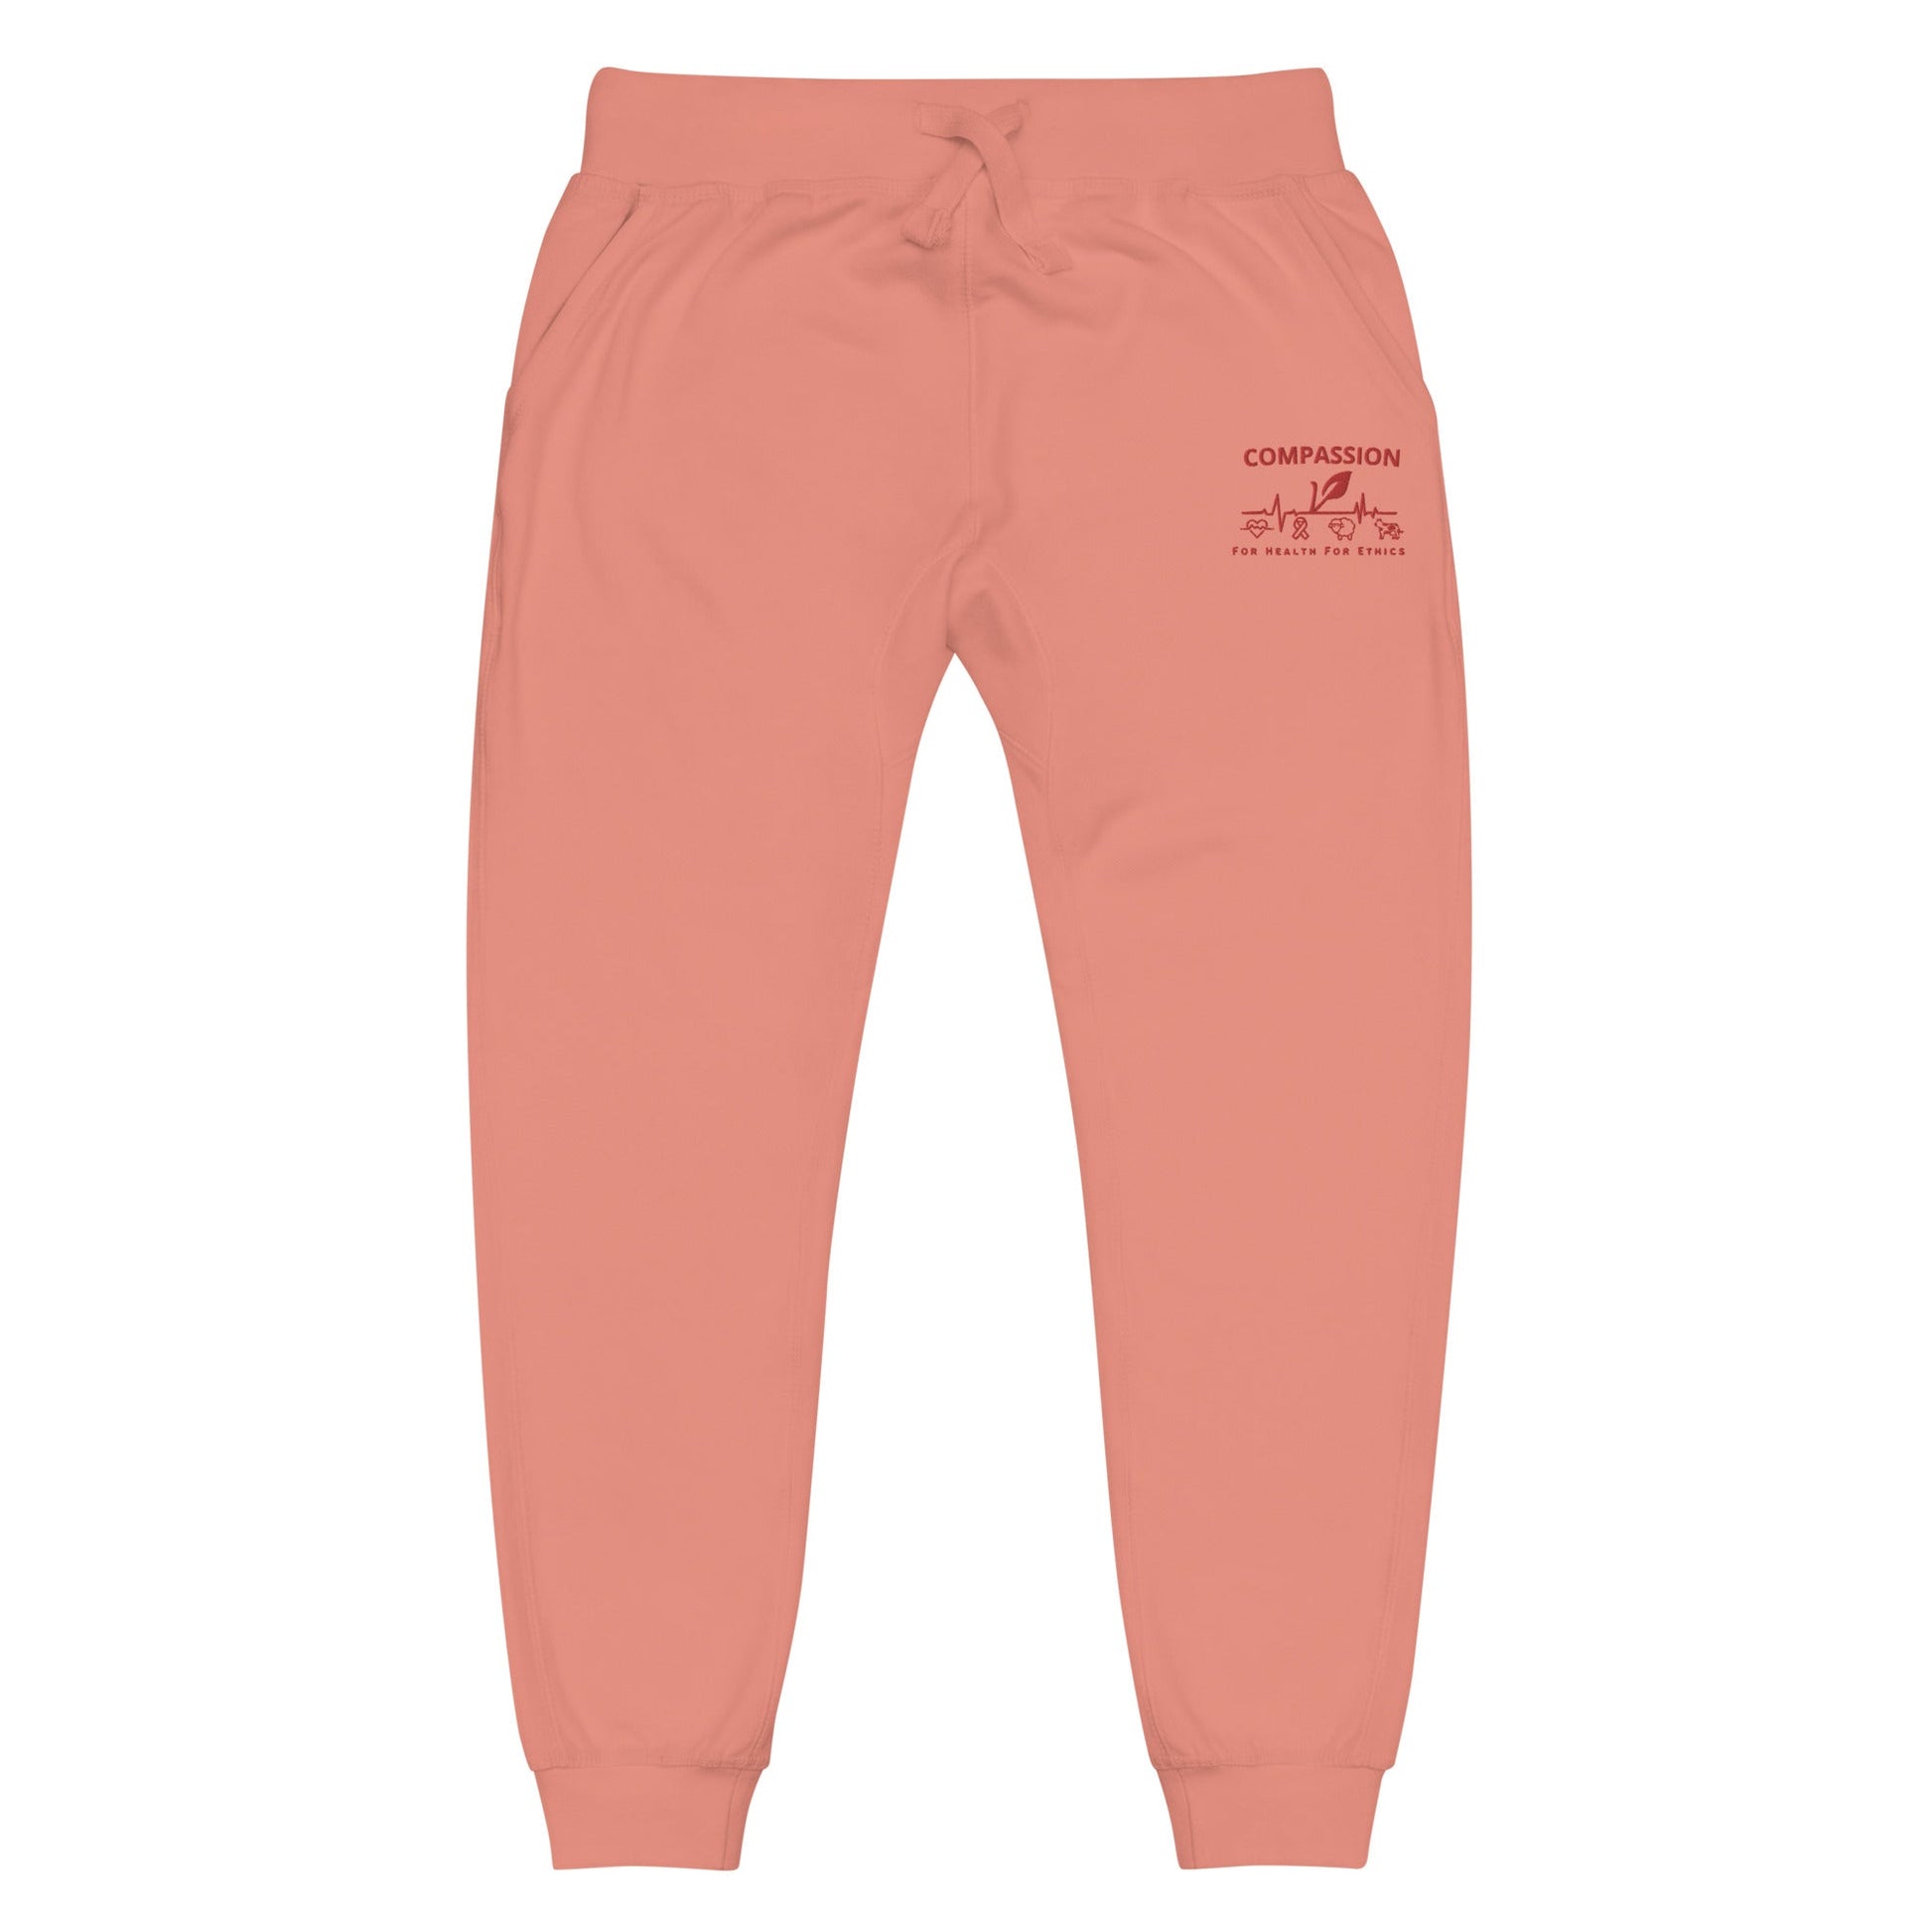 Compassion Fleece sweatpants - For Health For Ethics - Dusty Rose